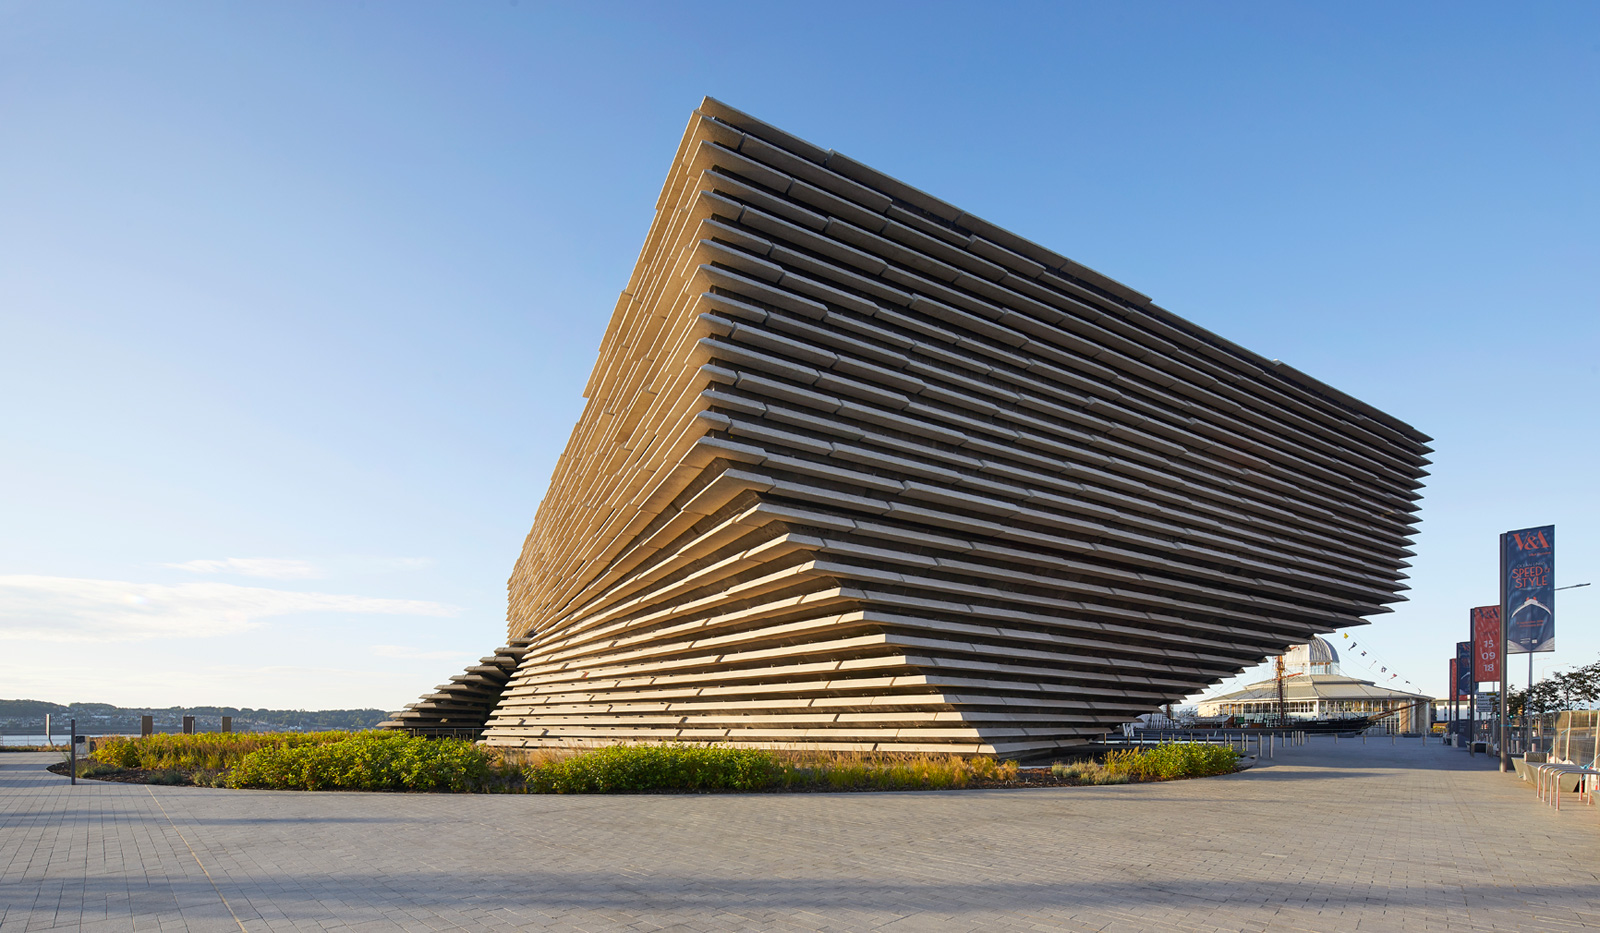 Shipshape: The V&A Dundee is an ode to Scottish craftsmanship